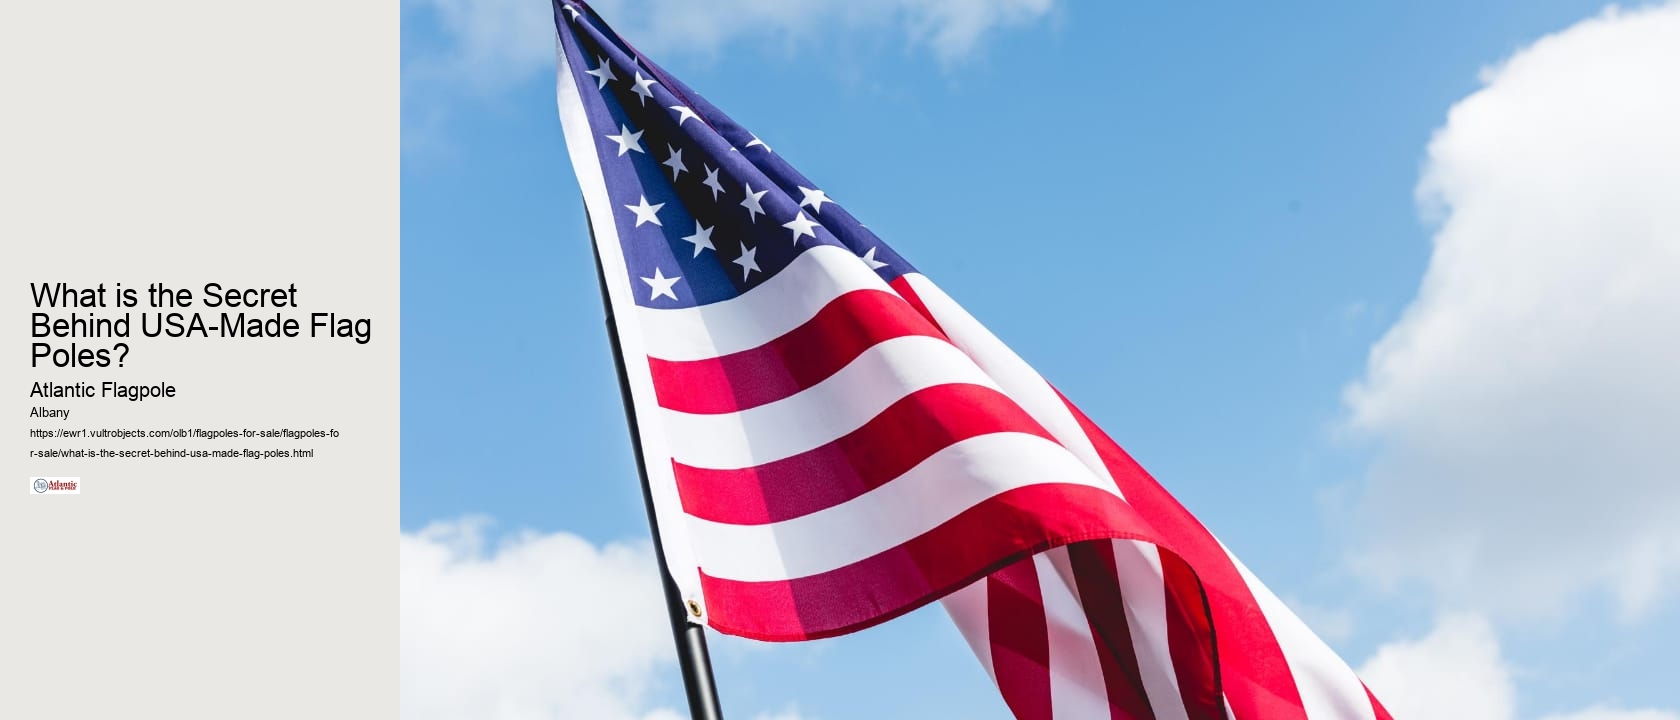 What is the Secret Behind USA-Made Flag Poles?